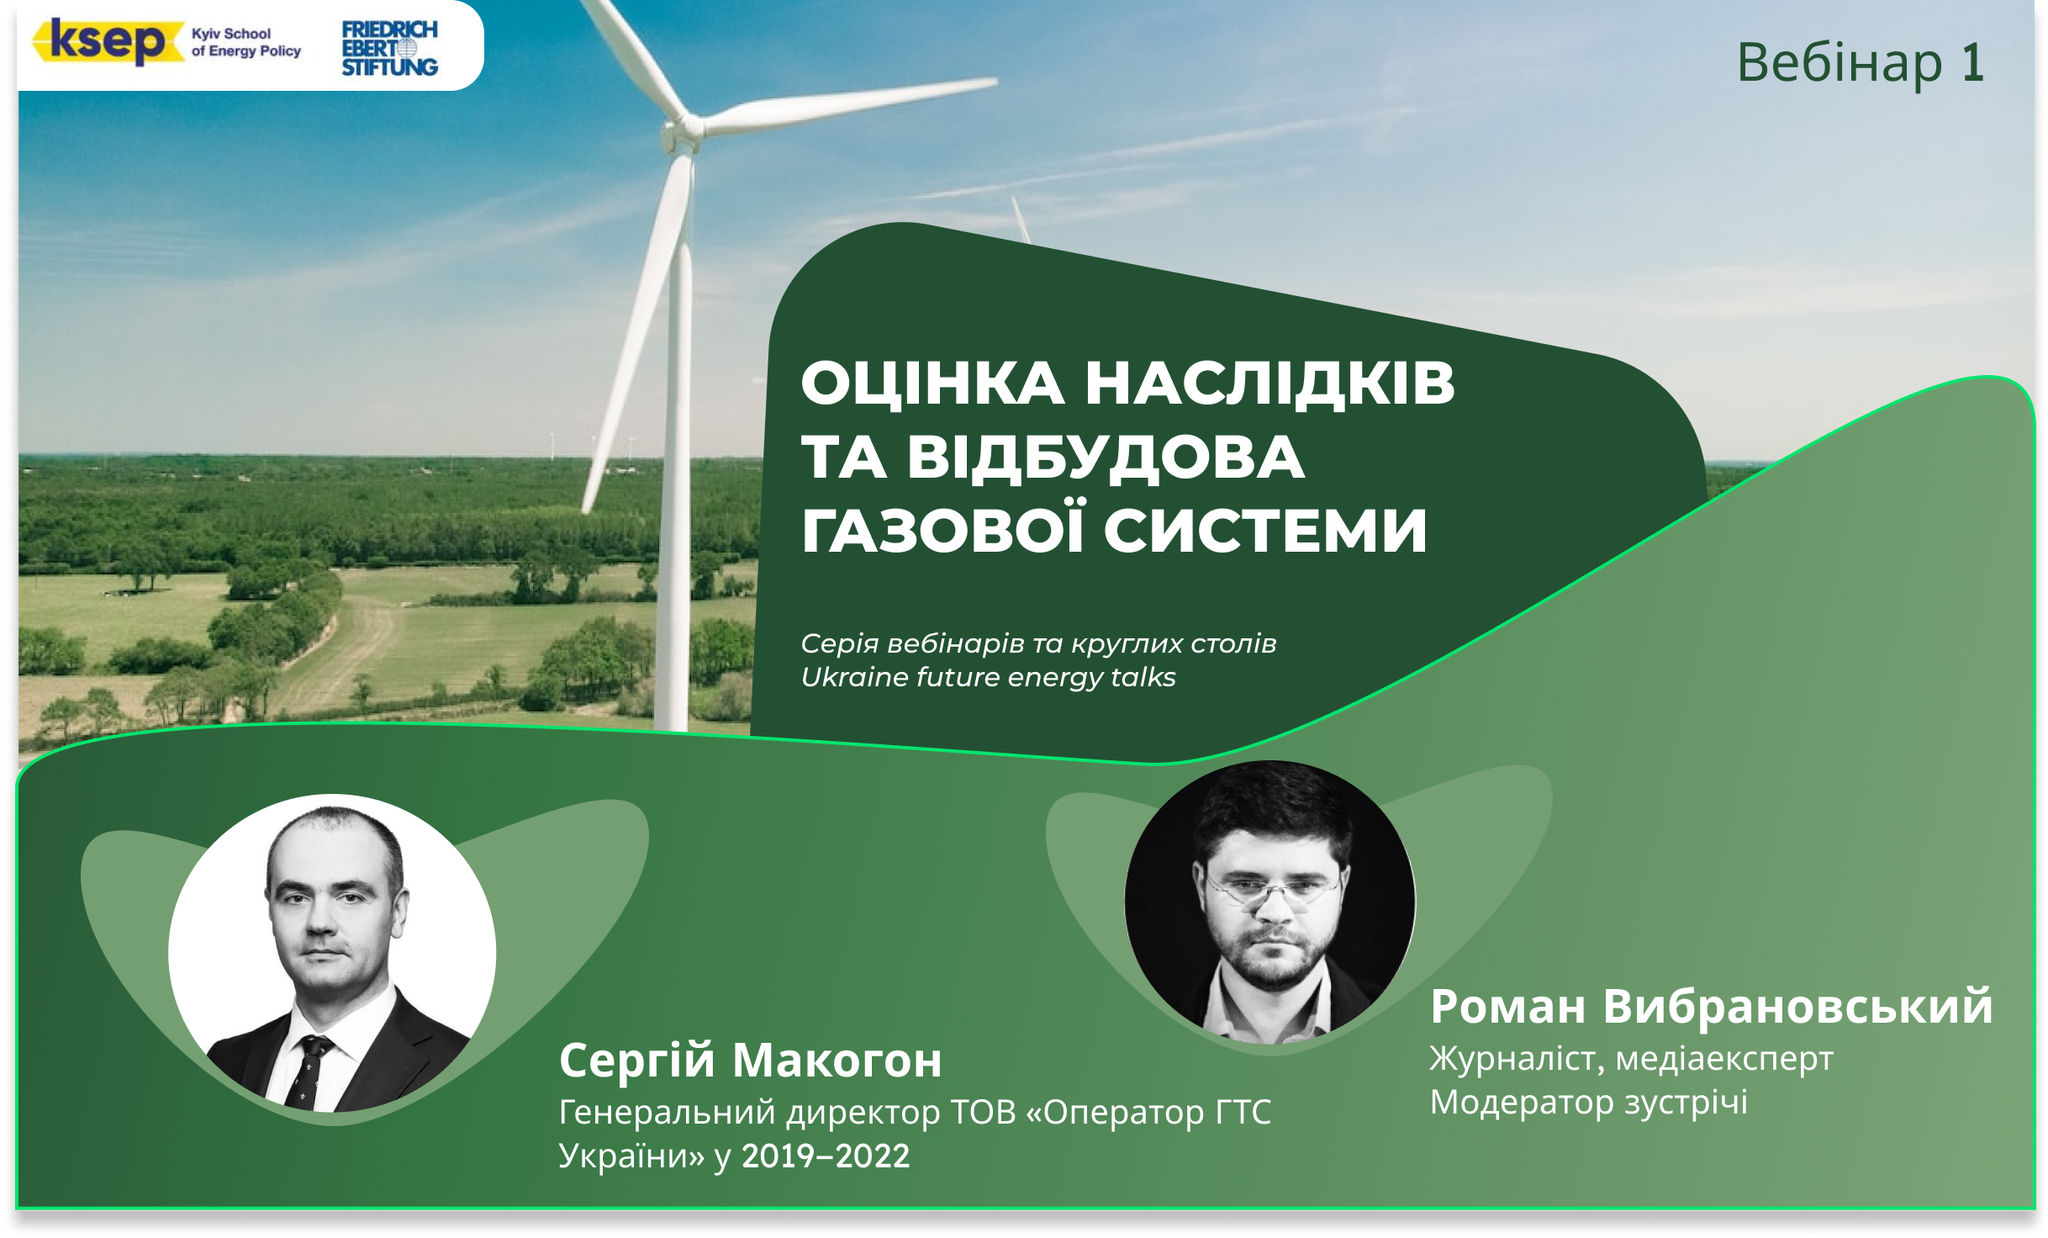 Serhiy Makogon: "We need to modernize our gas transmission system" 